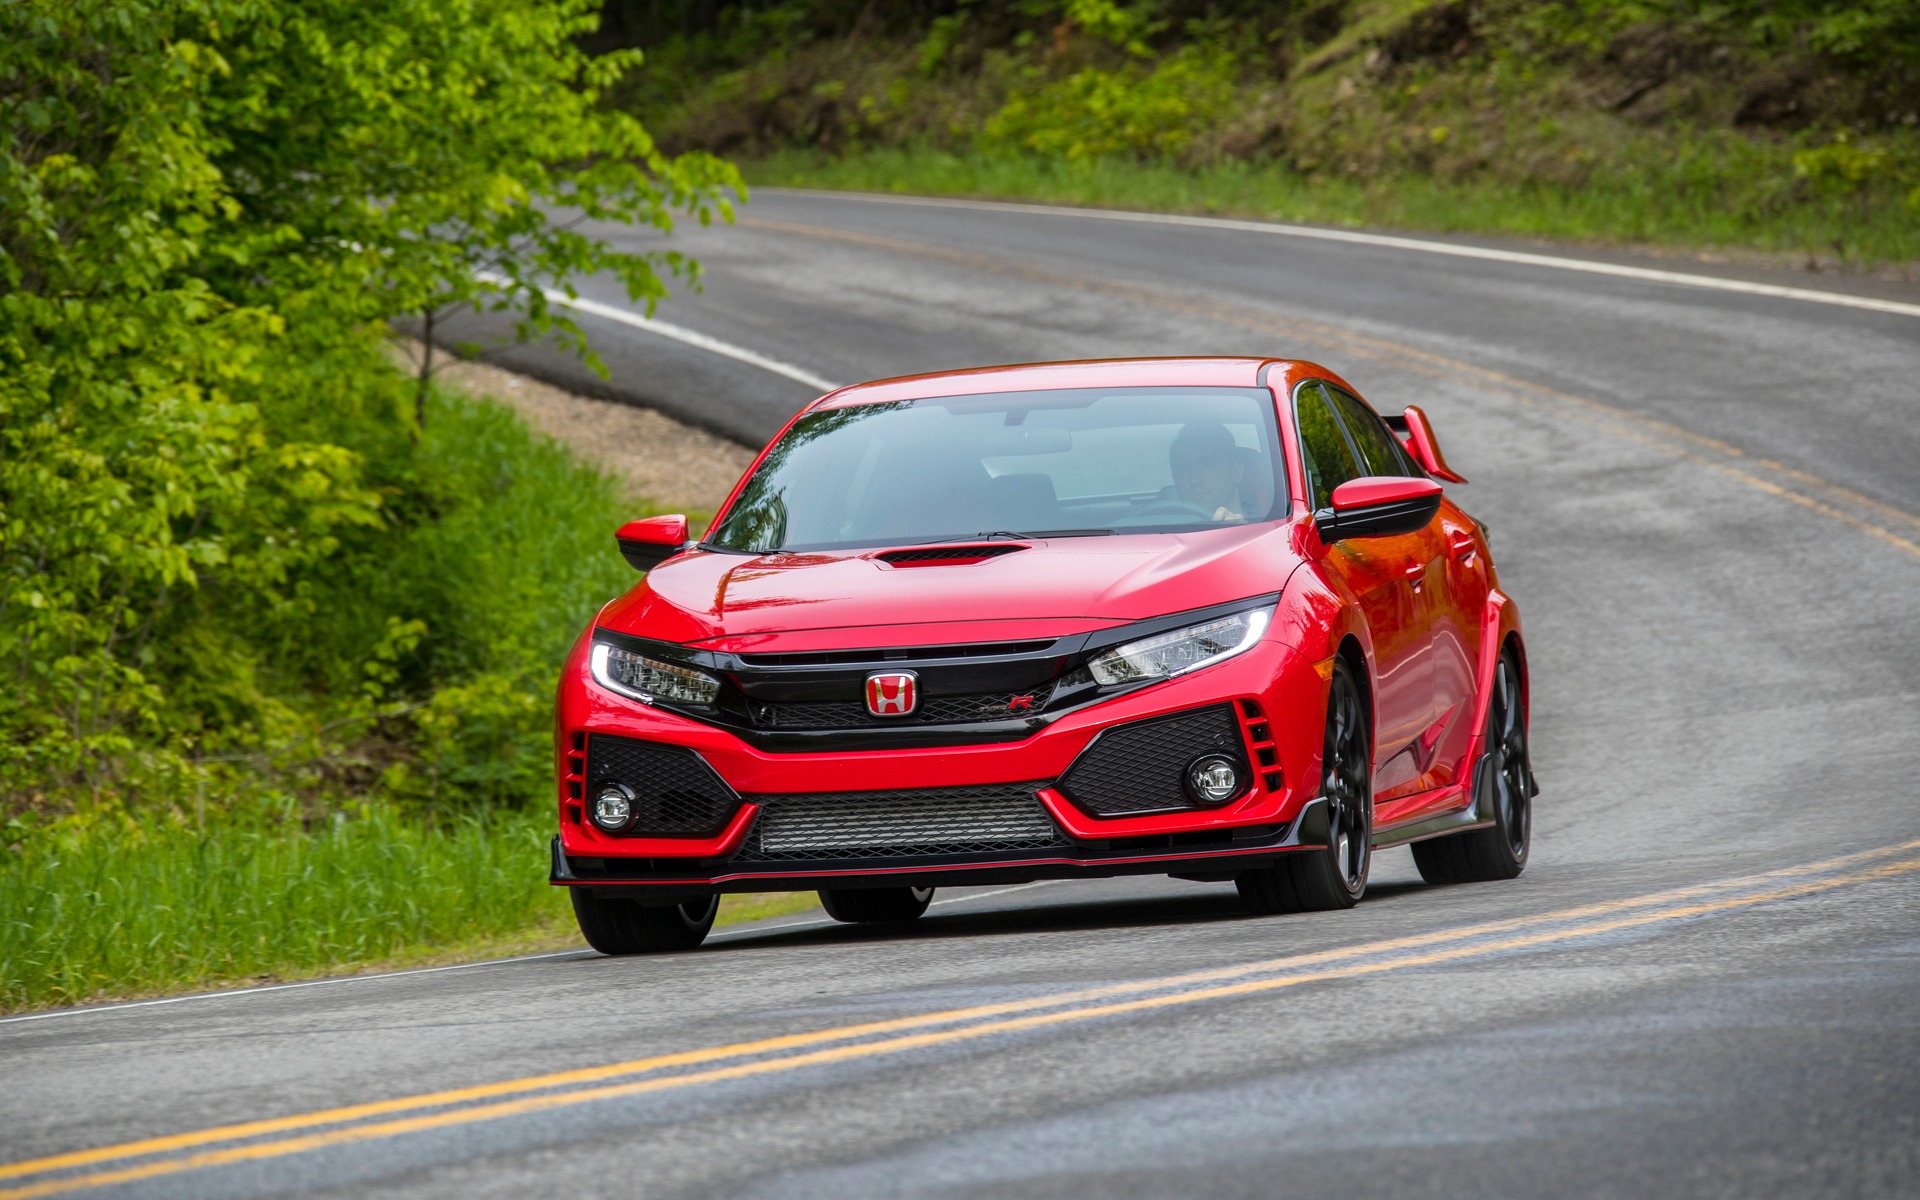 2019 Honda Civic Tests News Photos Videos And Wallpapers The